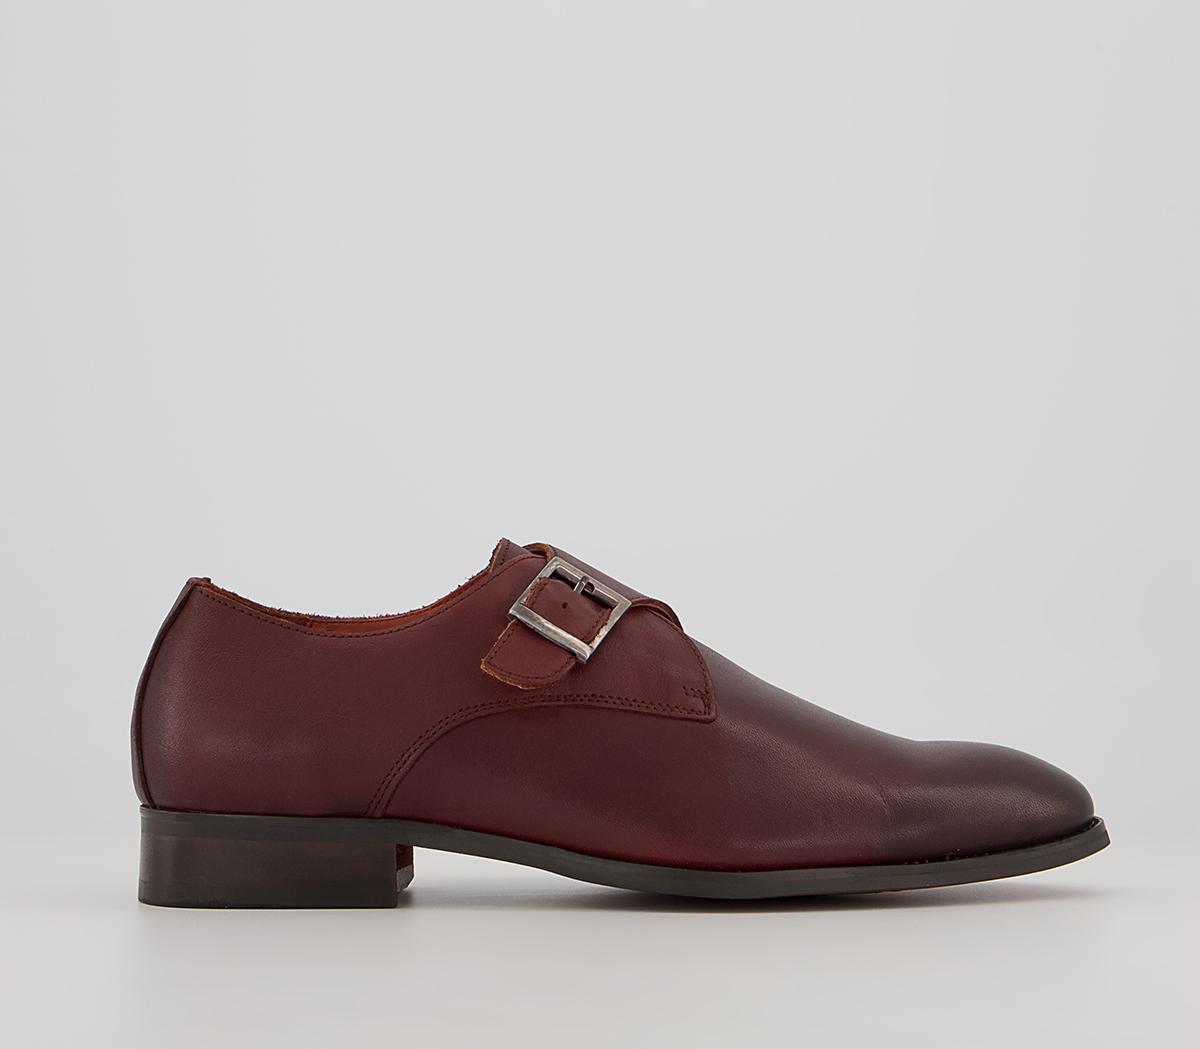 OfficeMontague Single Monk ShoesBurgundy Leather